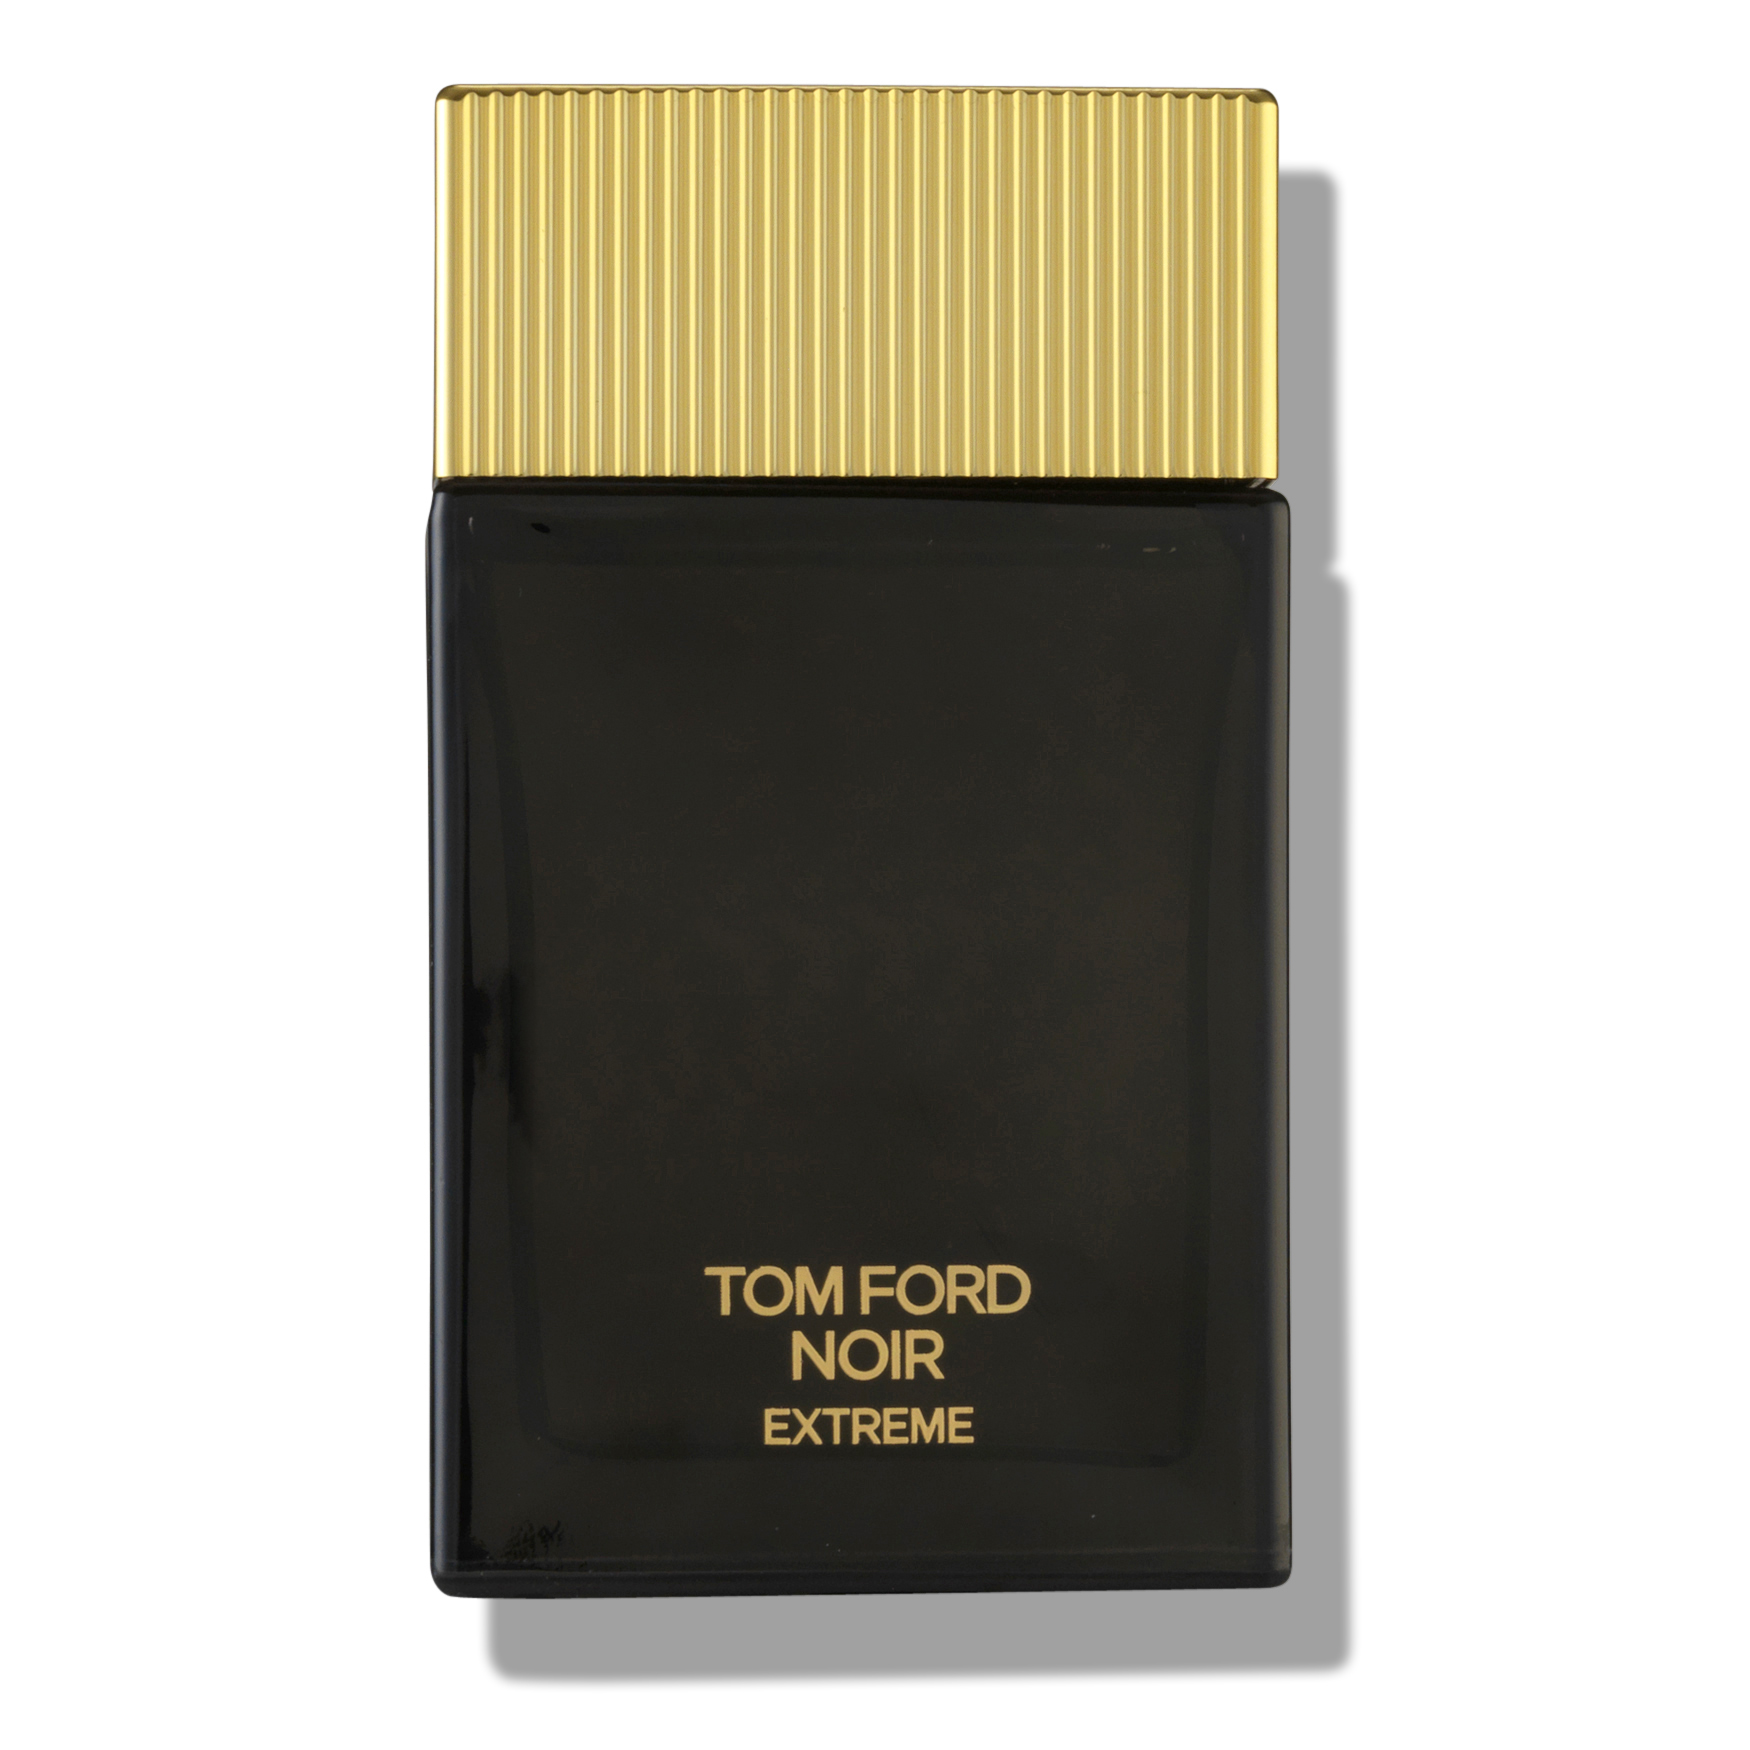 Tom Ford Noir Extreme | Space NK